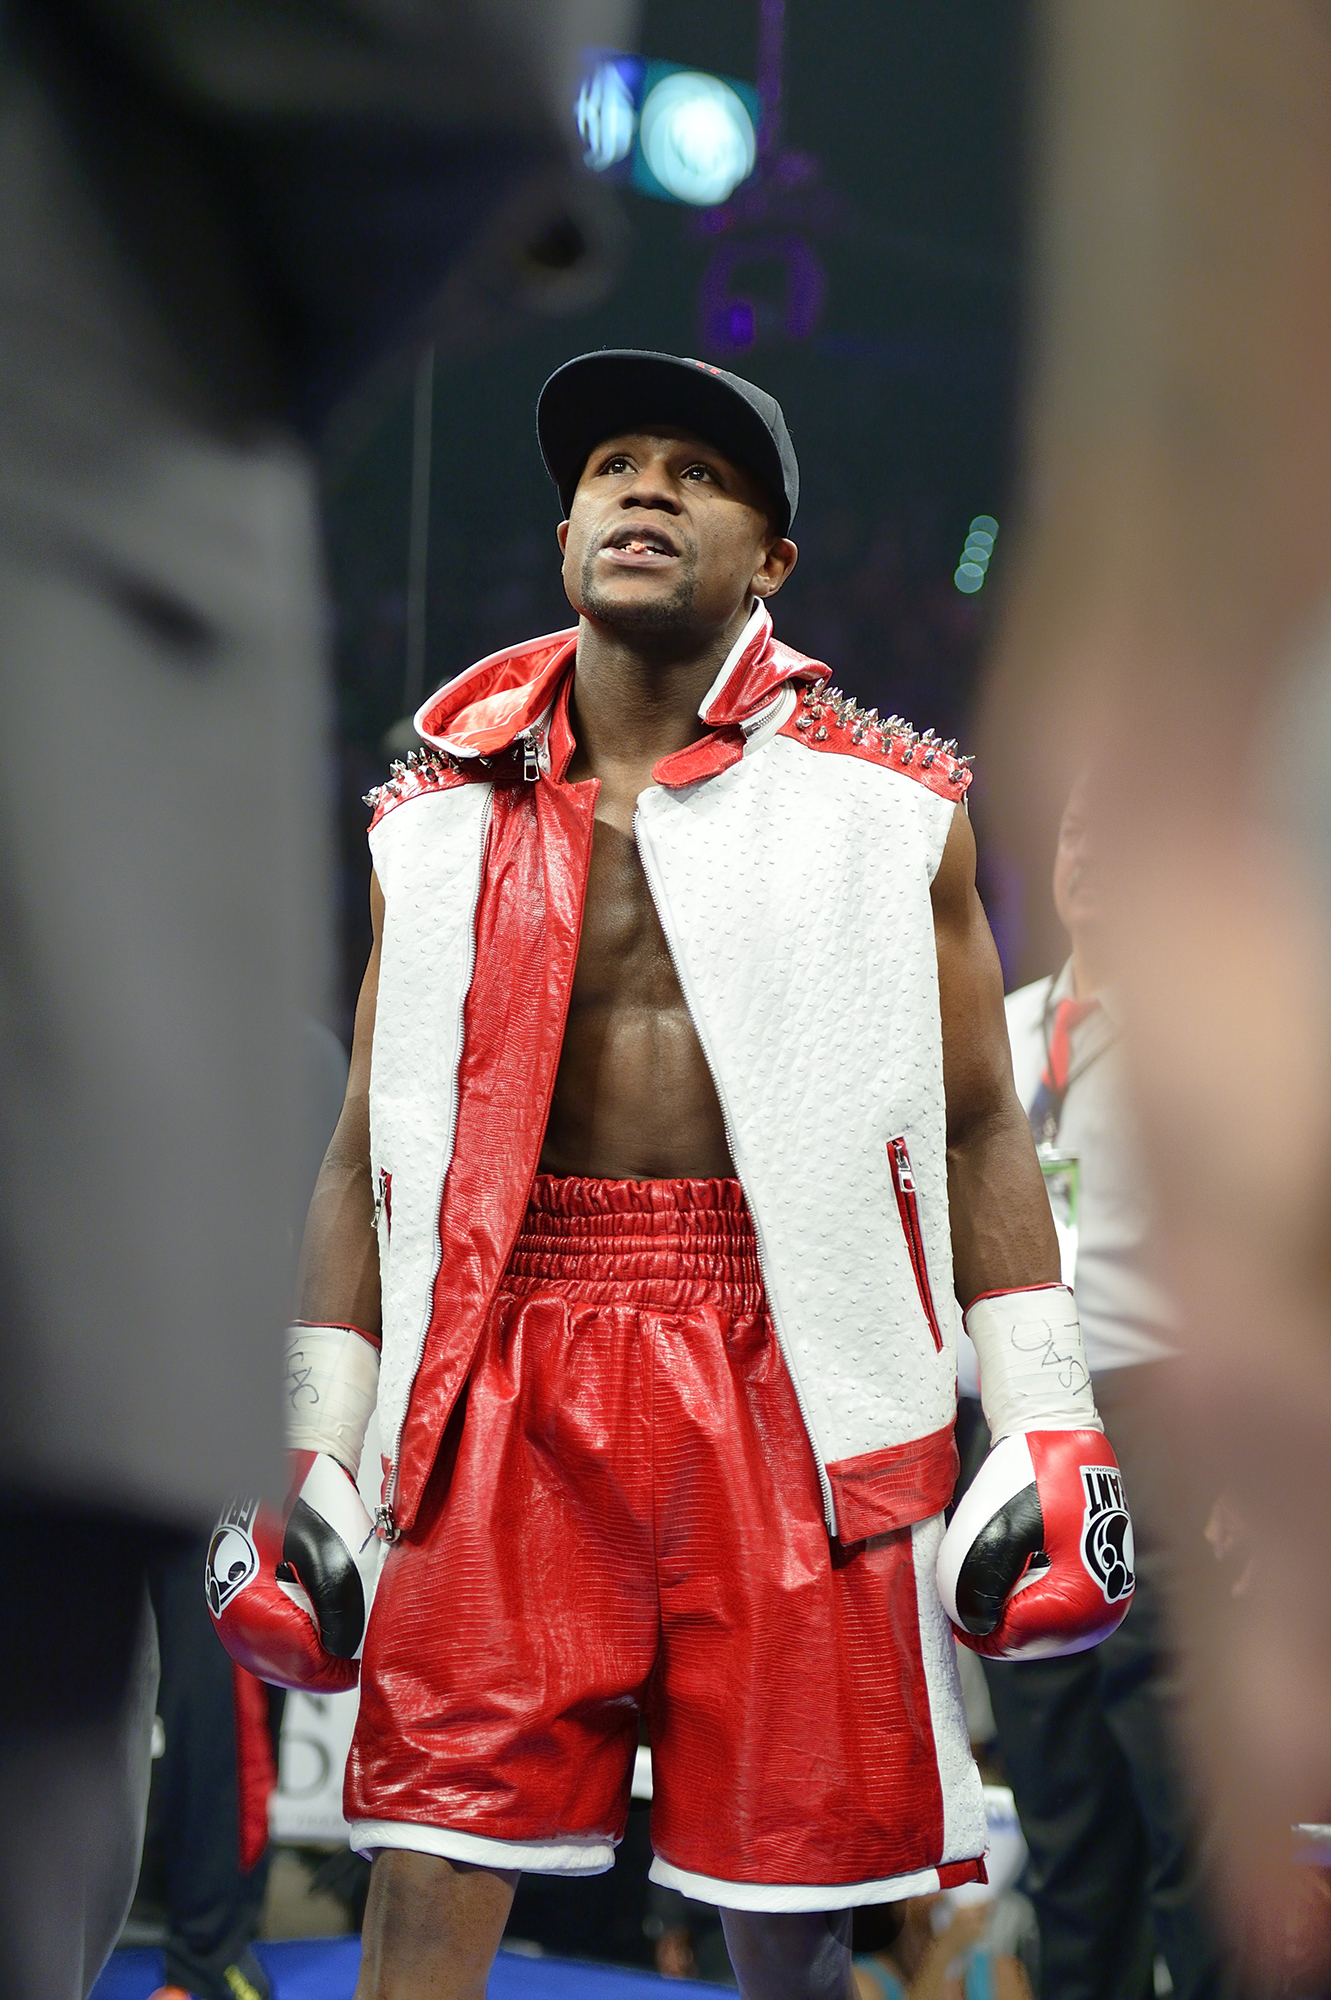 Floyd Mayweather Jr wearing his Dan-designed boxing gear. Image: Getty Images